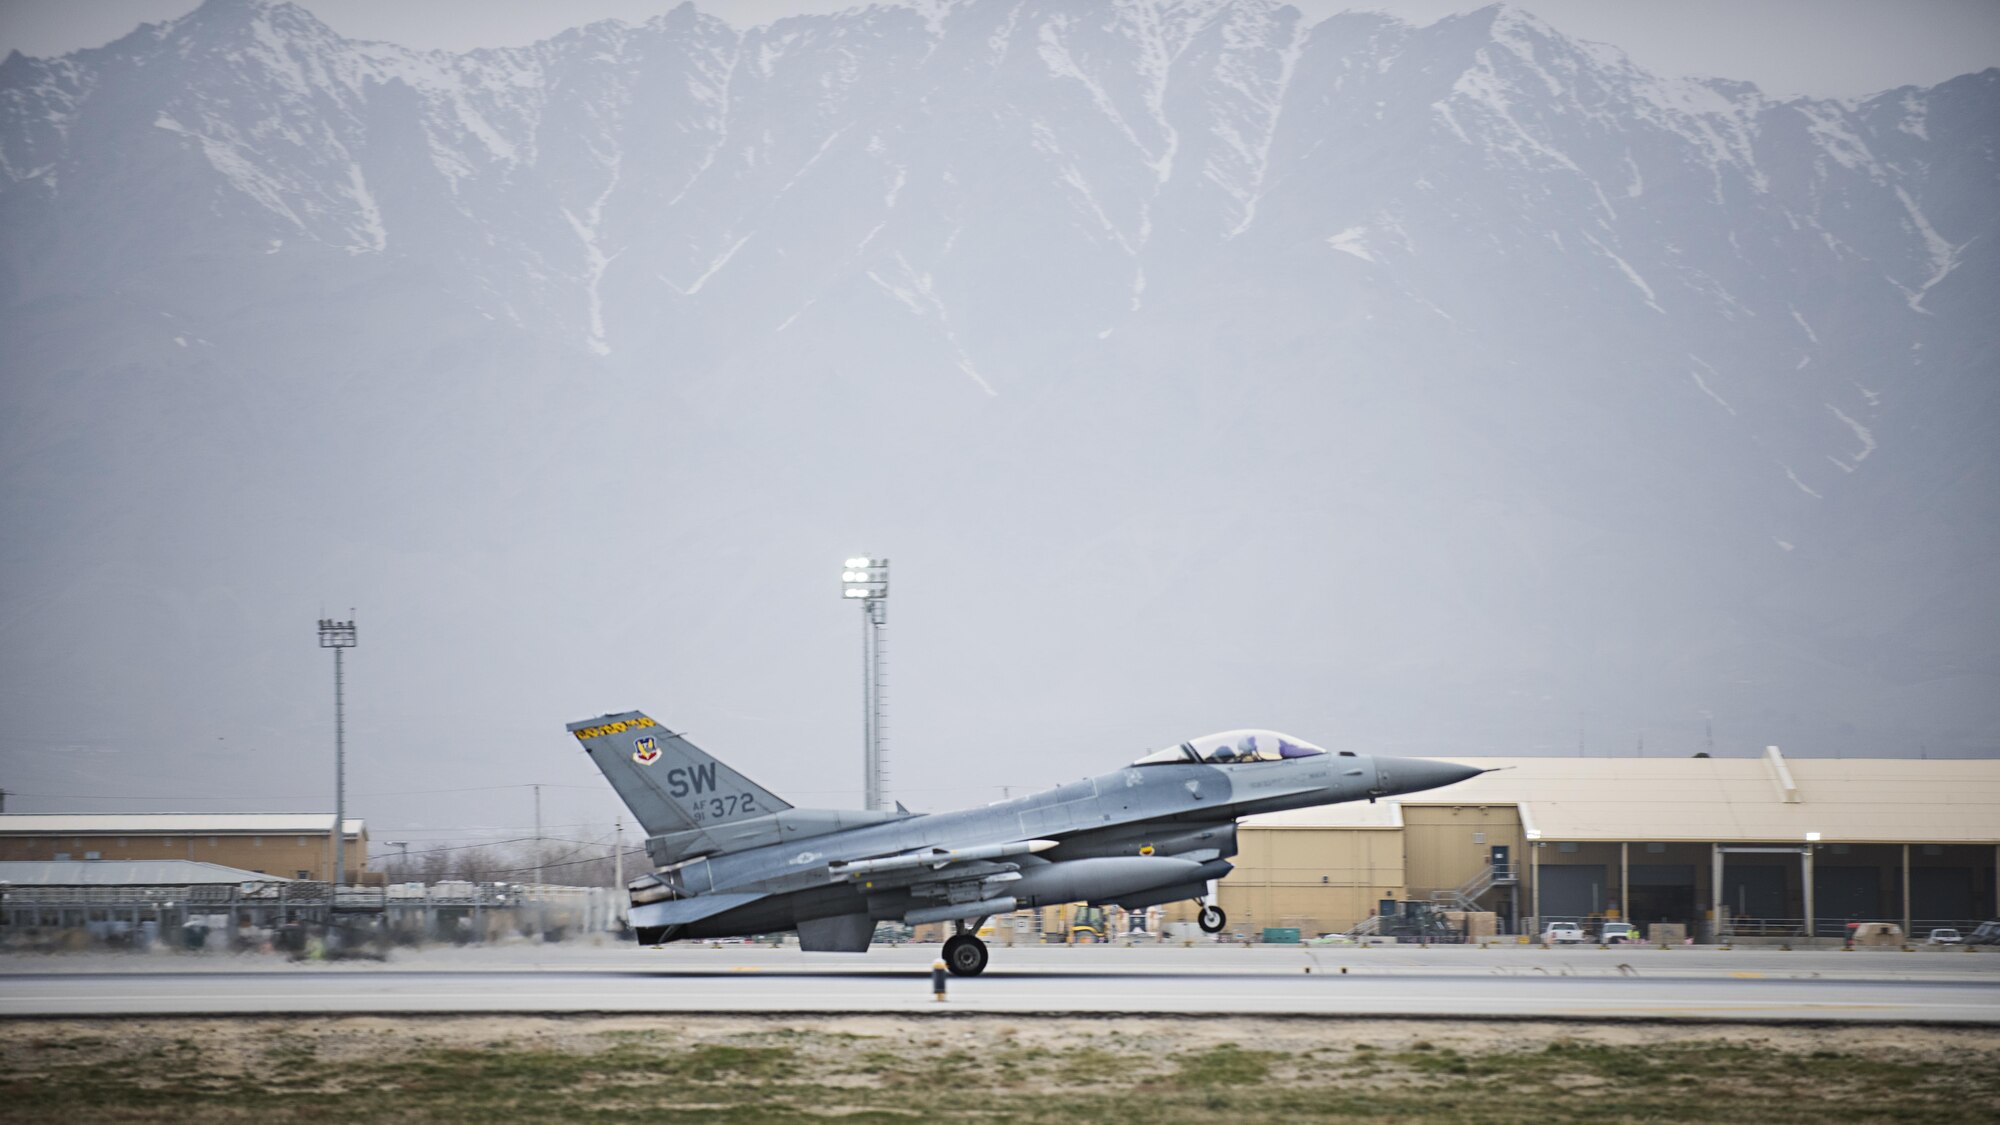 Lt. Col. Craig Andrle, 79th Expeditionary Fighter Squadron commander, lands after flying a combat sortie March 20, 2017 at Bagram Airfield, Afghanistan. During the sortie, Andrle reached a milestone 1,000 combat hours. (U.S. Air Force photo by Staff Sgt. Katherine Spessa)